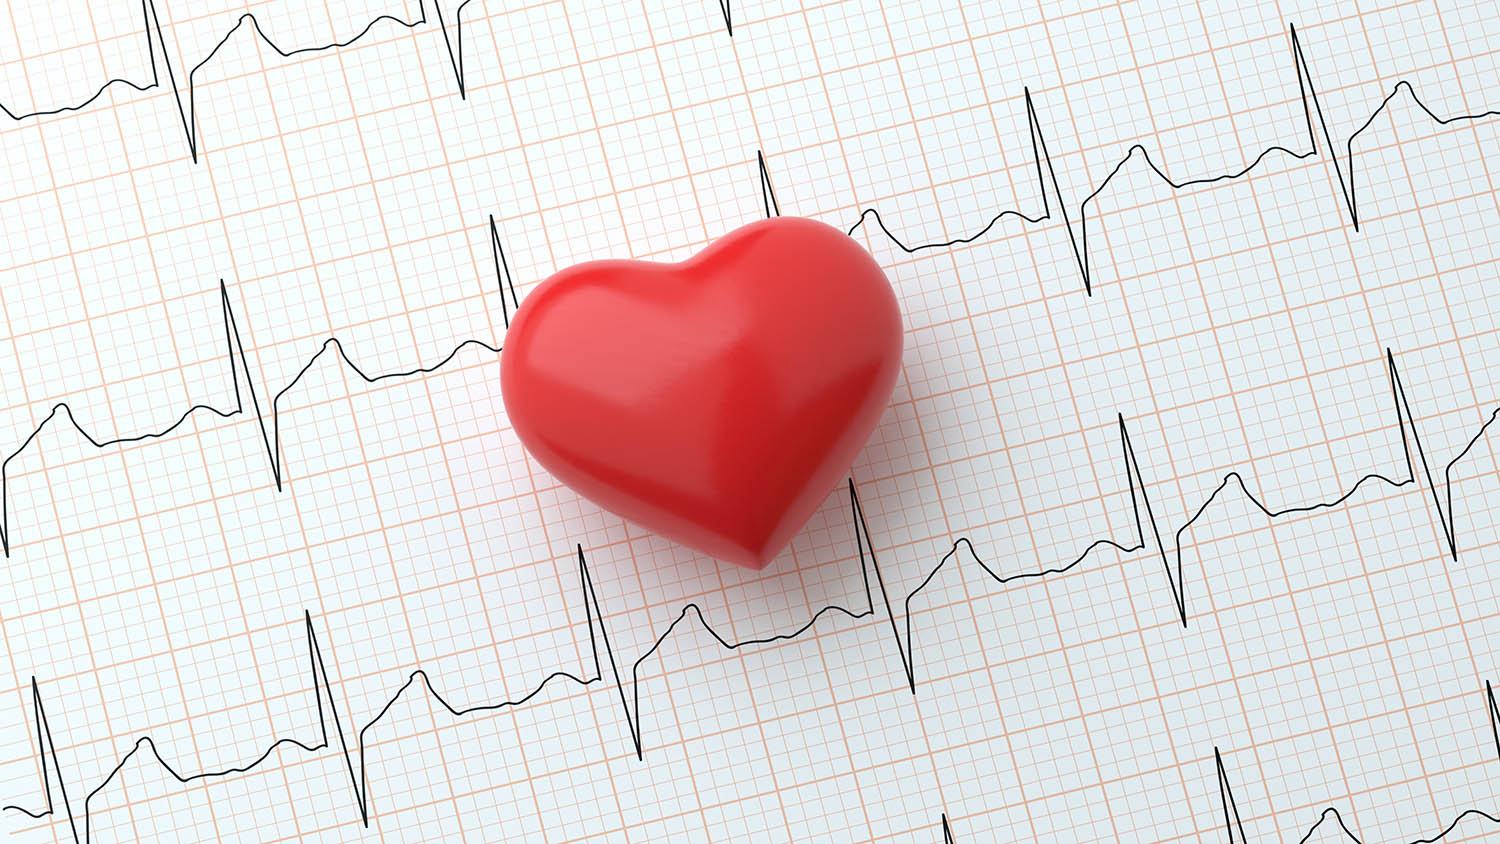 Atrial Fibrillation: An Overlooked Heart Disorder